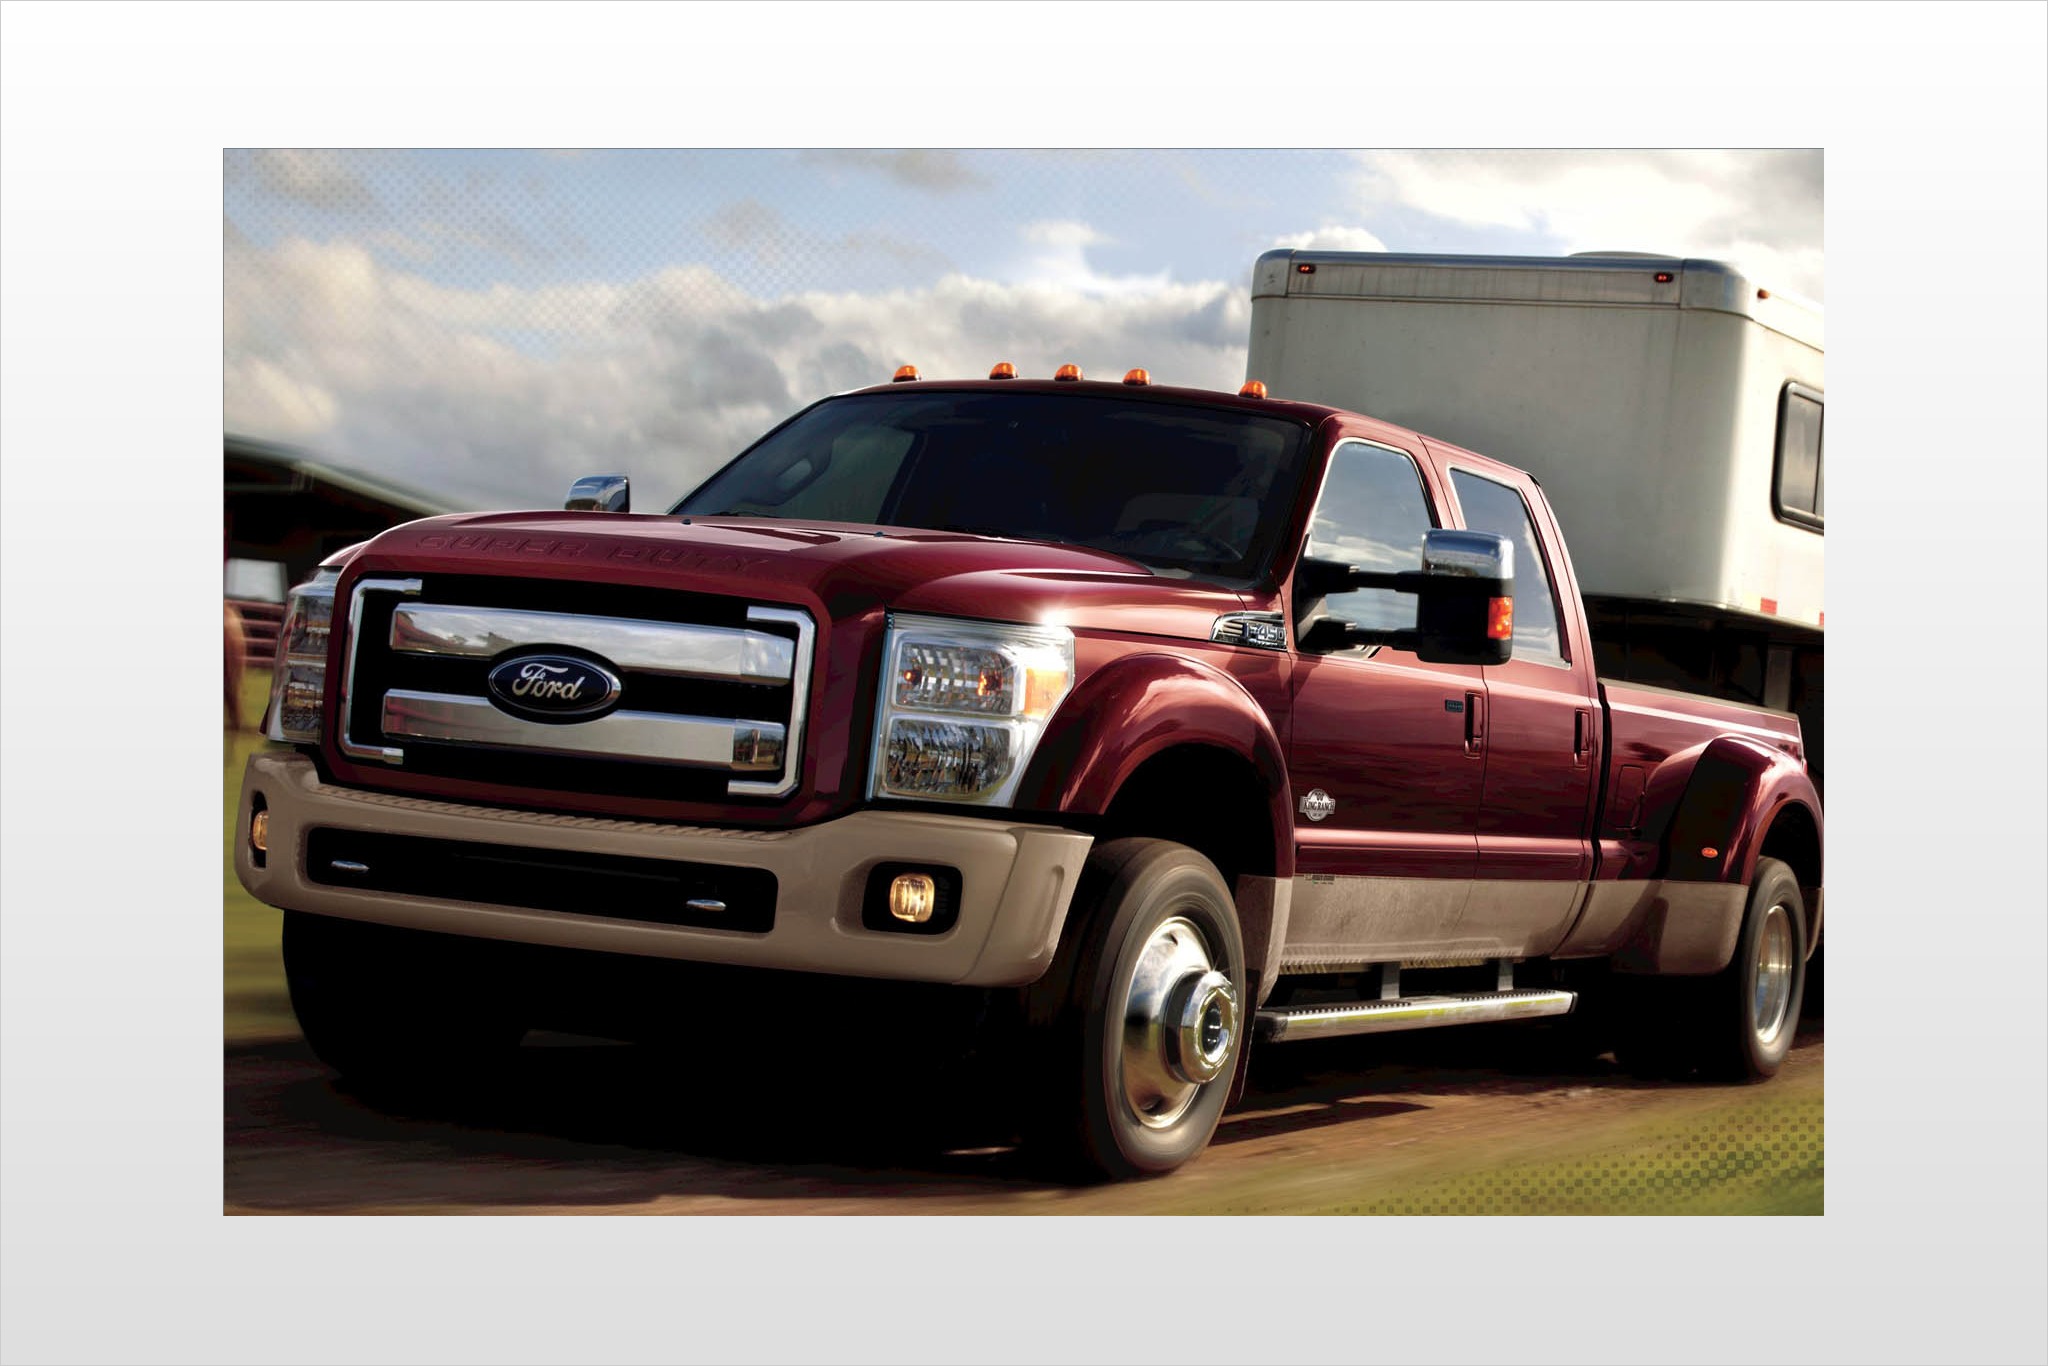 2012 Ford F-450 Super Duty King Ranch Crew Cab Pickup Exterior